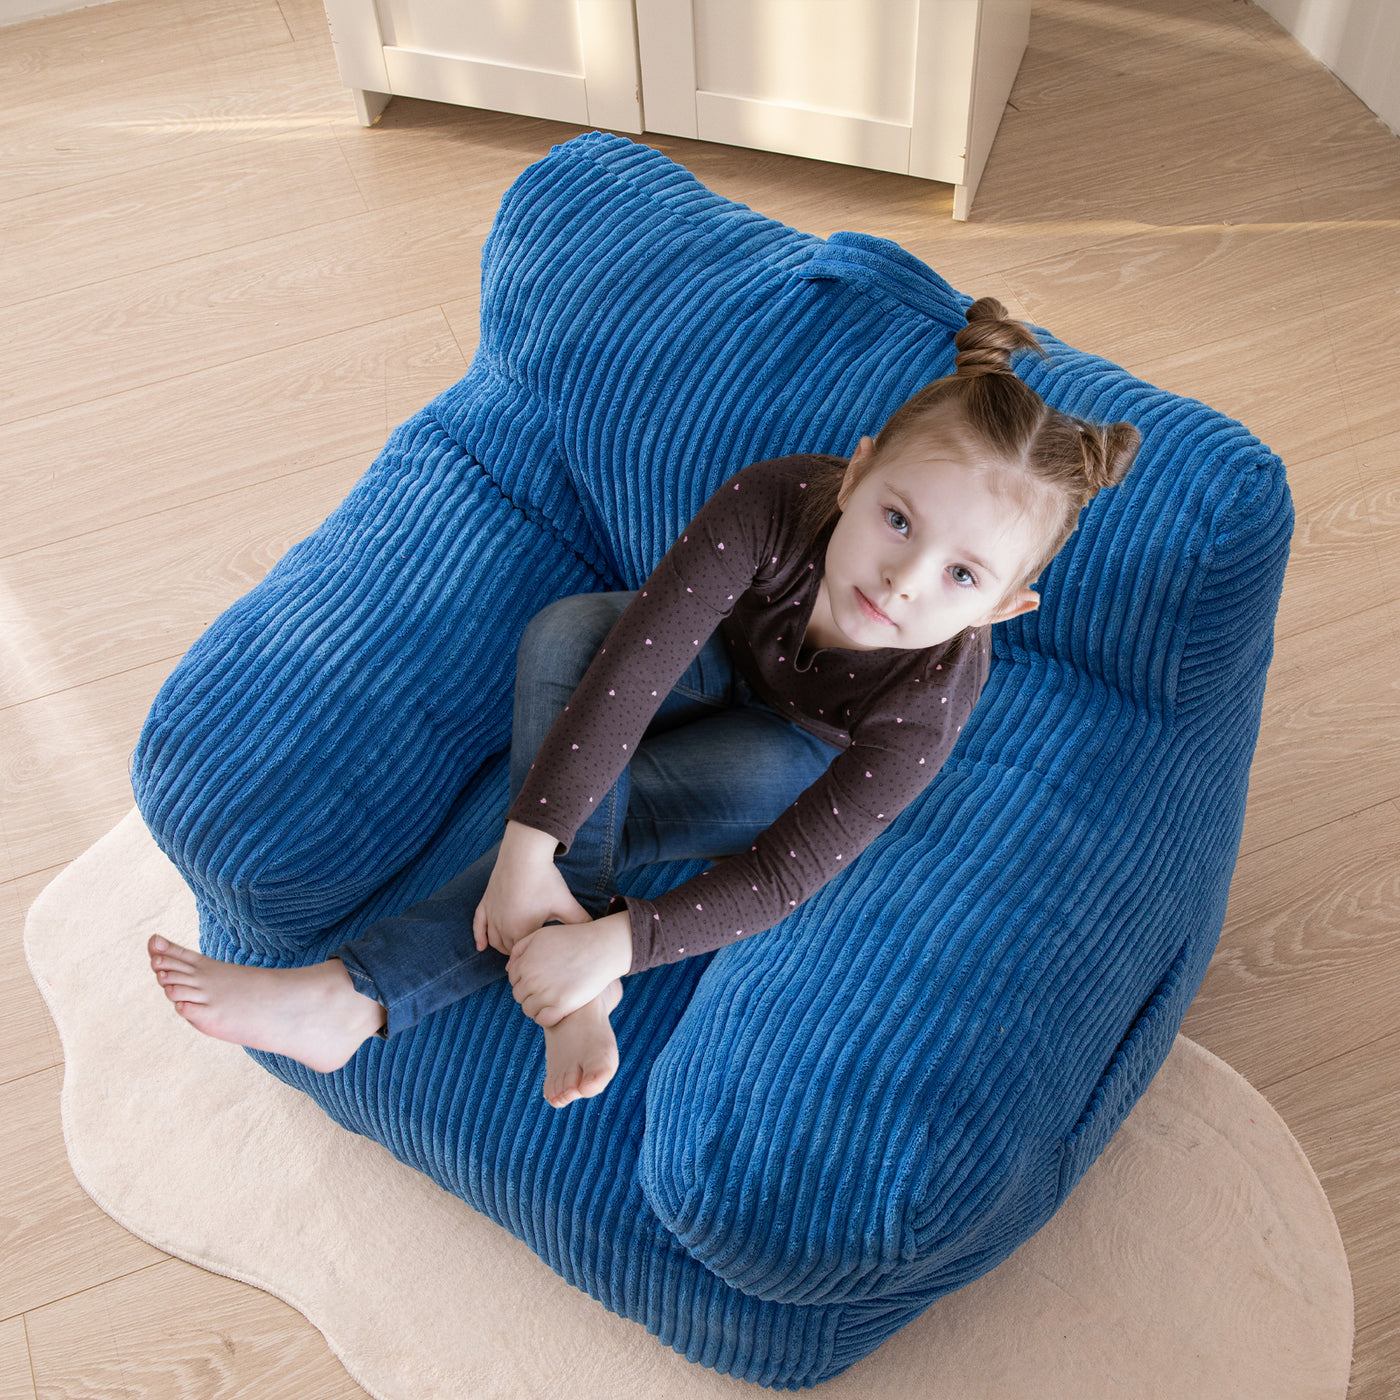 MAXYOYO Kids Bean Bag Chair, Corduroy Bean Bag Couch with Armrests for Children's Room (Blue)